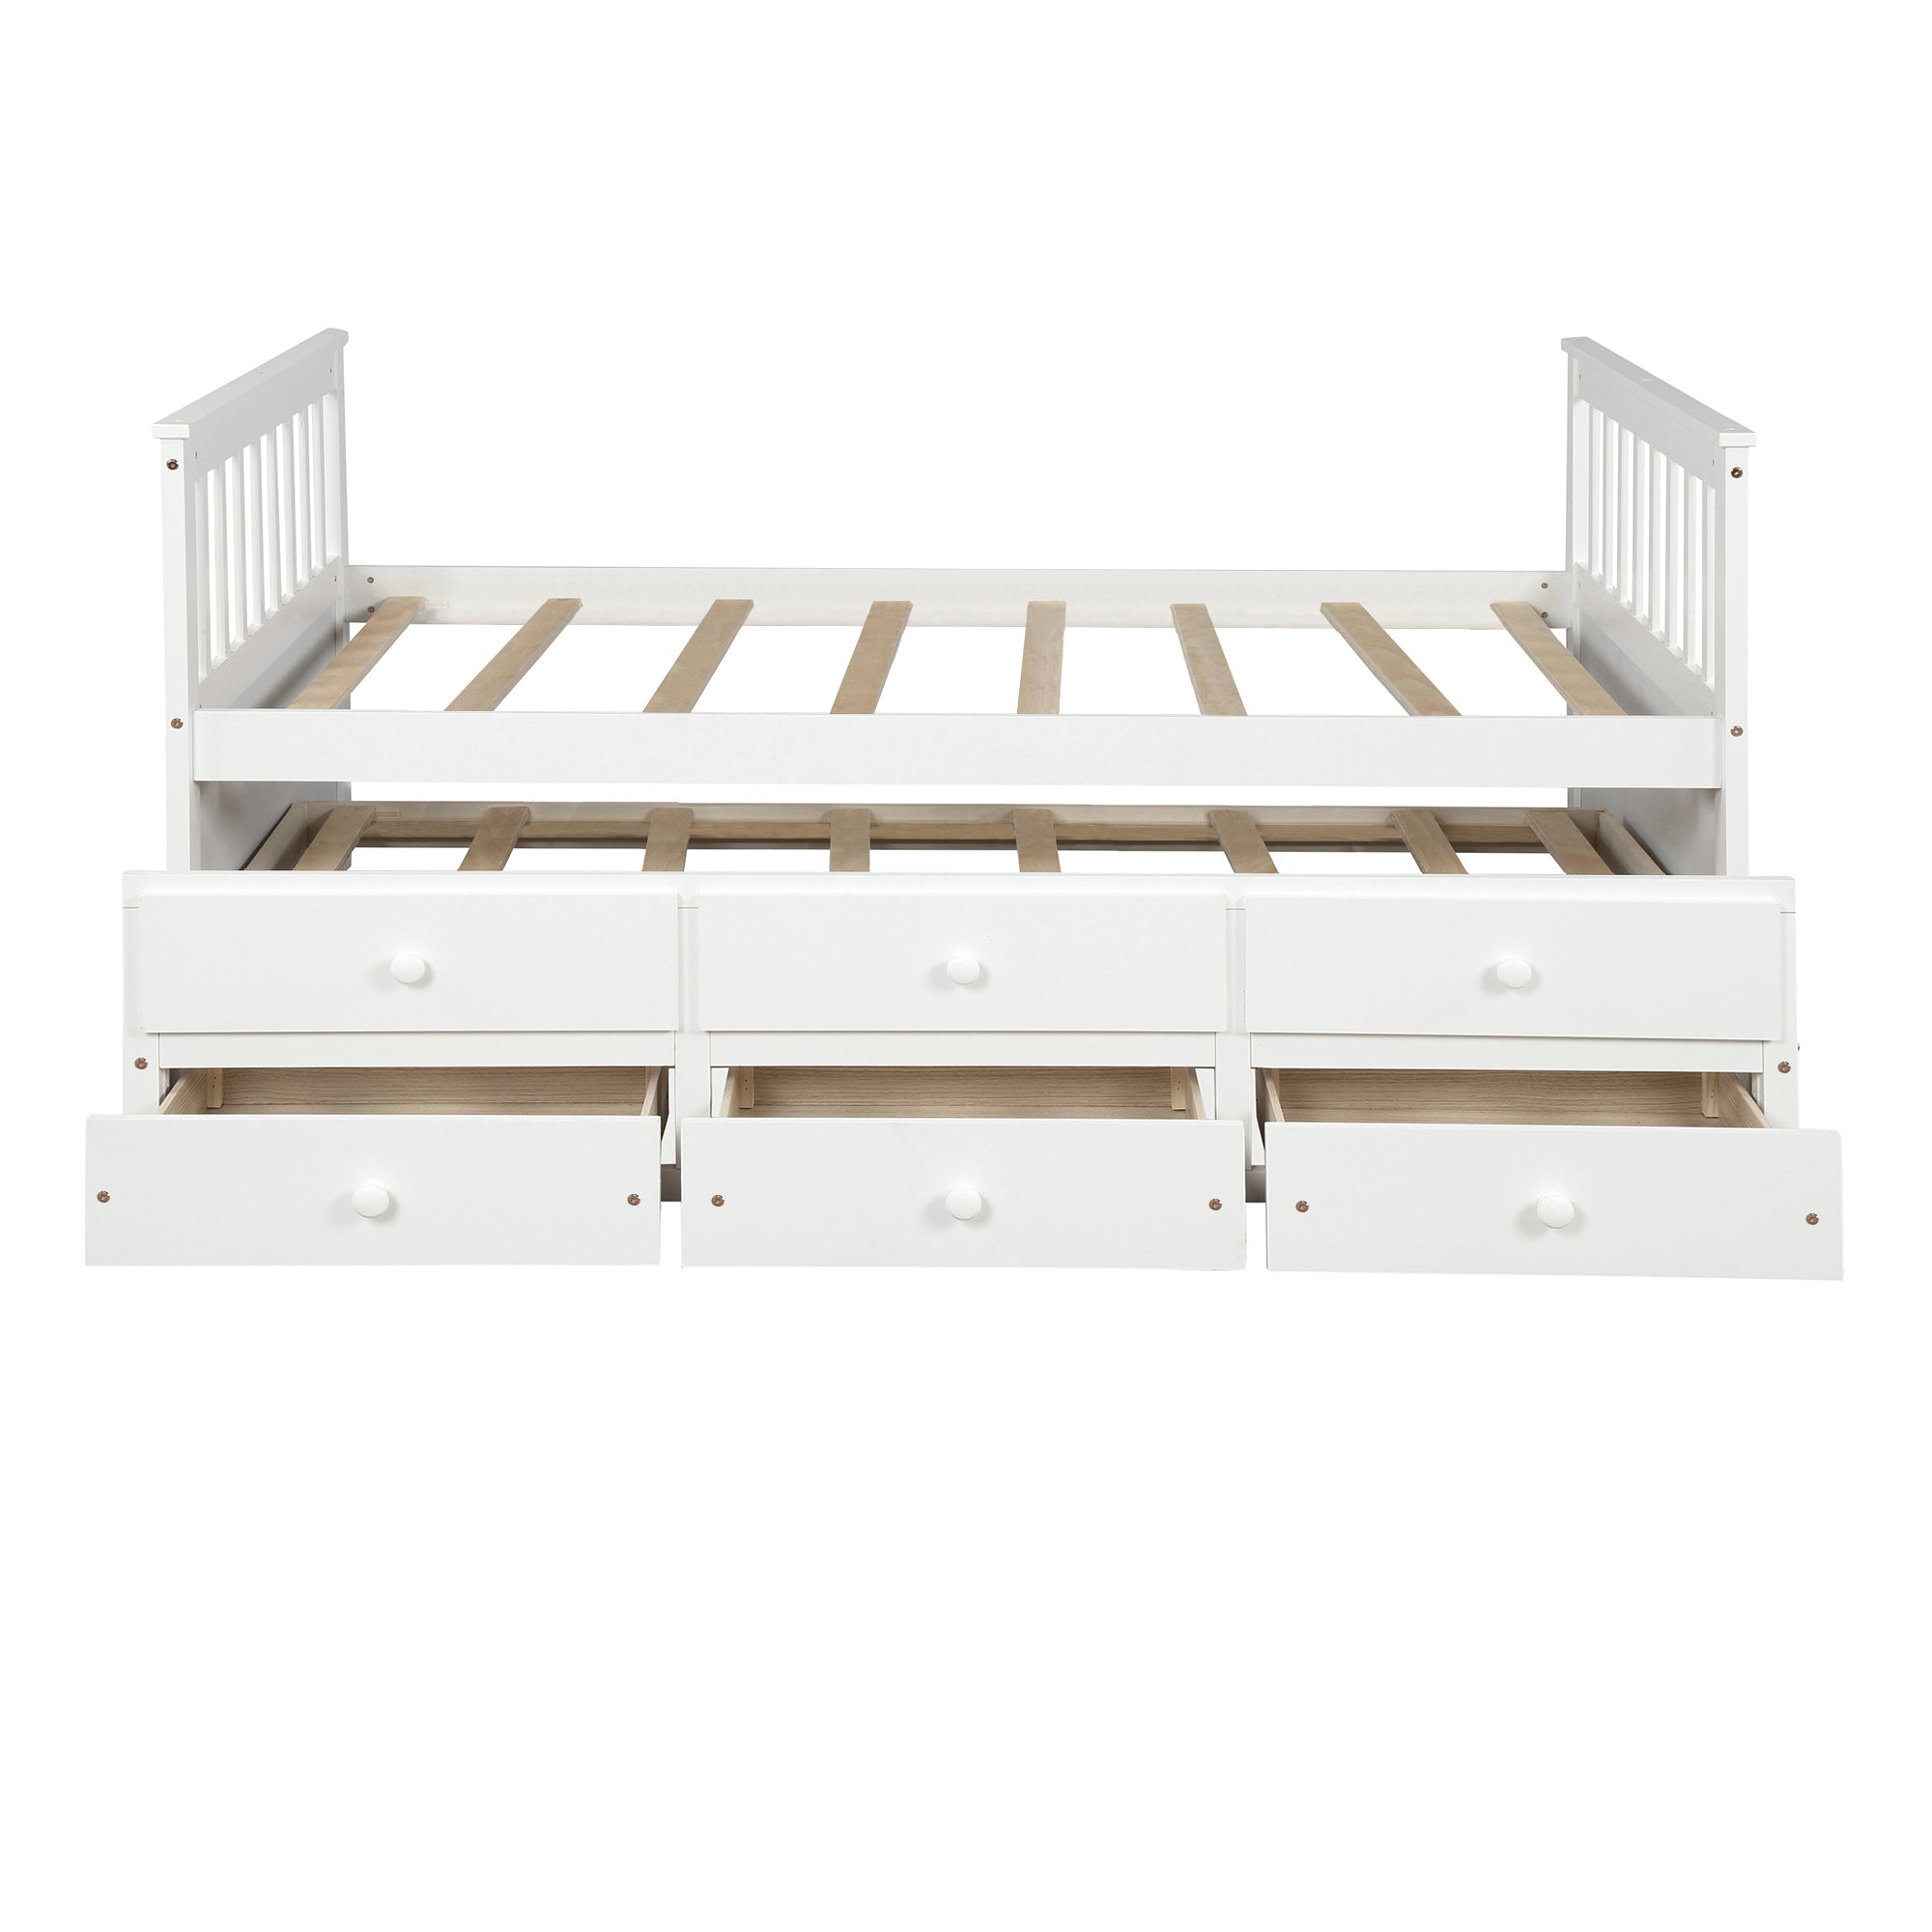 TOPMAX Captain's Bed Twin Daybed with Trundle and Storage Drawers | White Finish | Space-Saving Solution